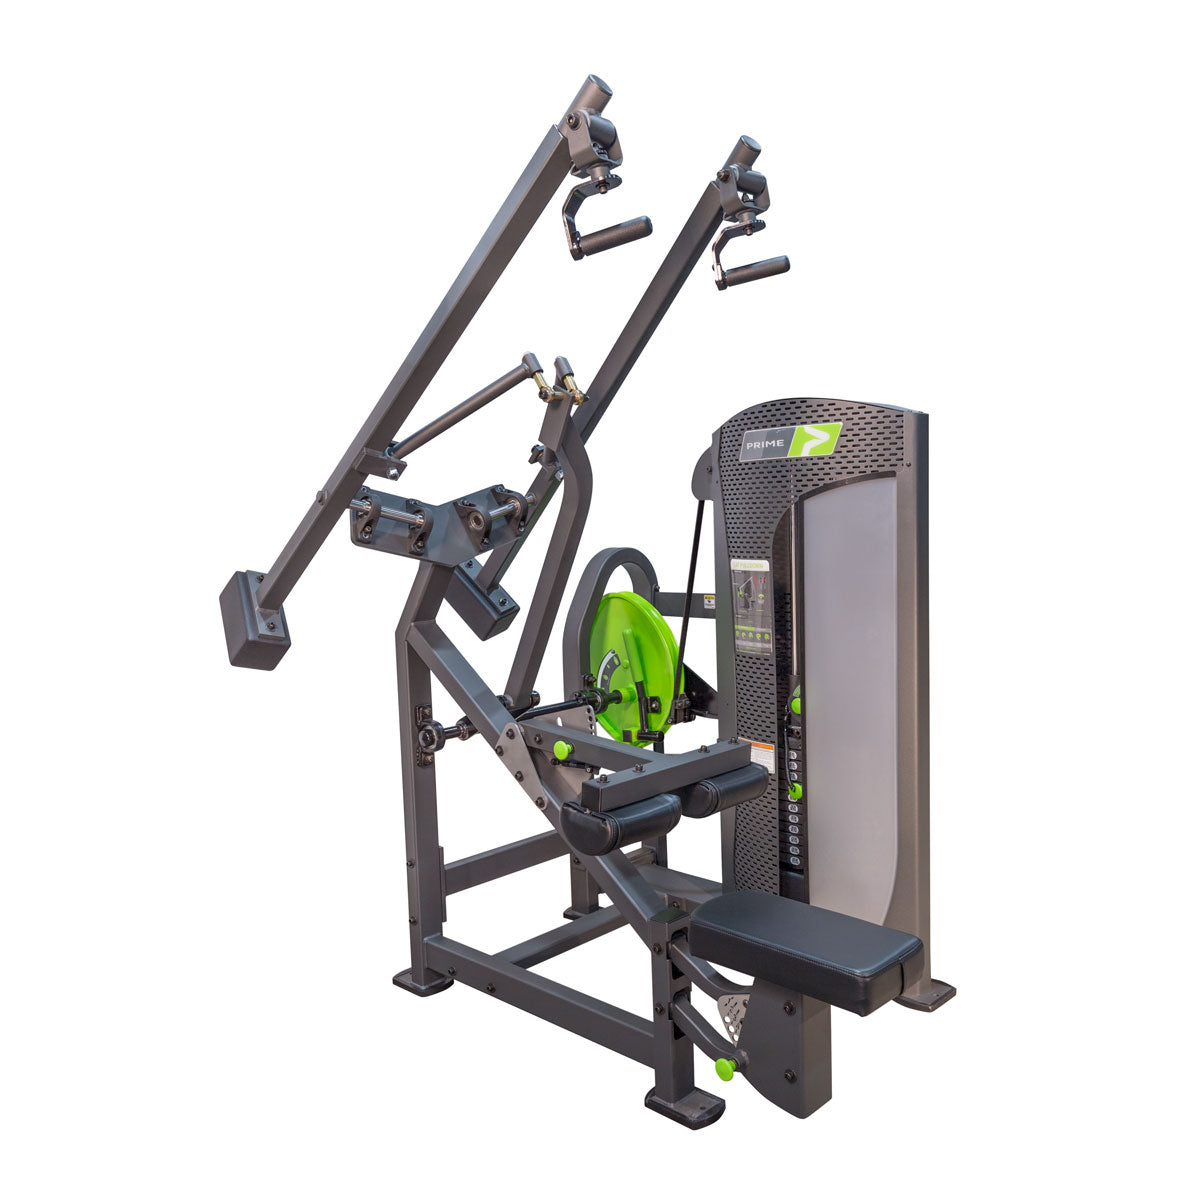 The PRIME Prodigy Racks are HERE! - PRIME Fitness USA